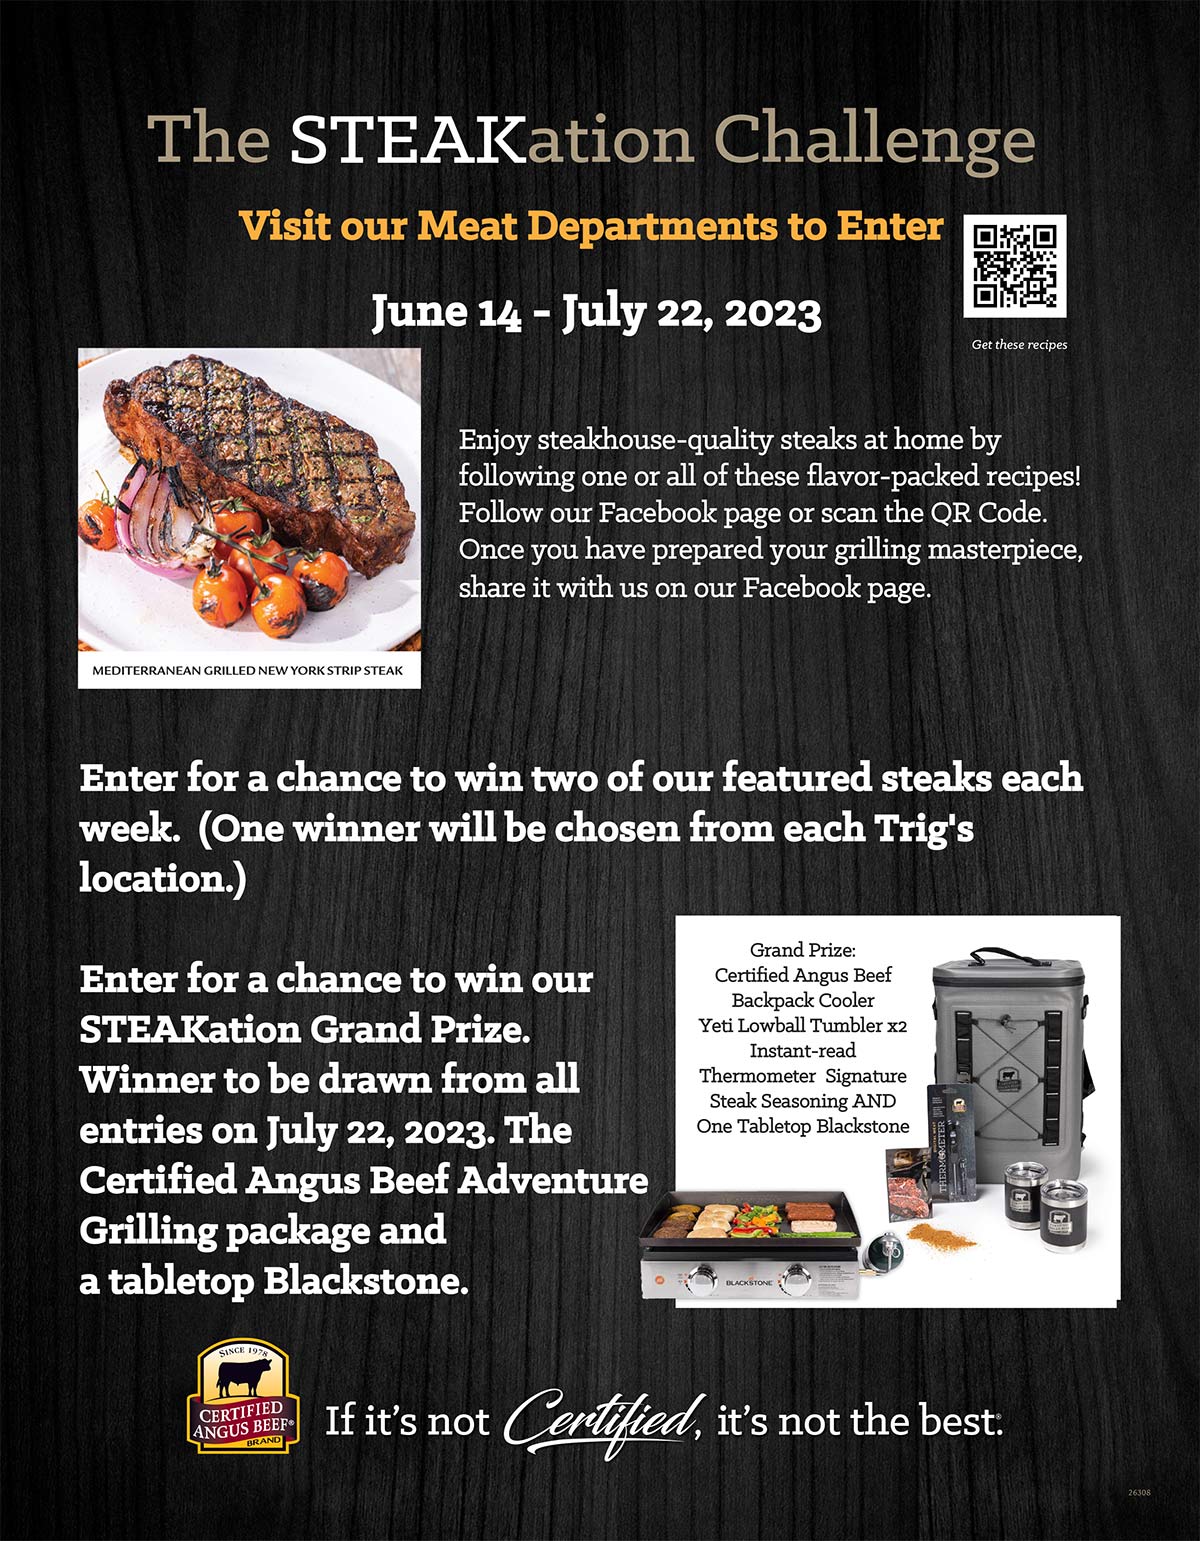 Click this image to download a PDF of the STEAKation Challenge information.